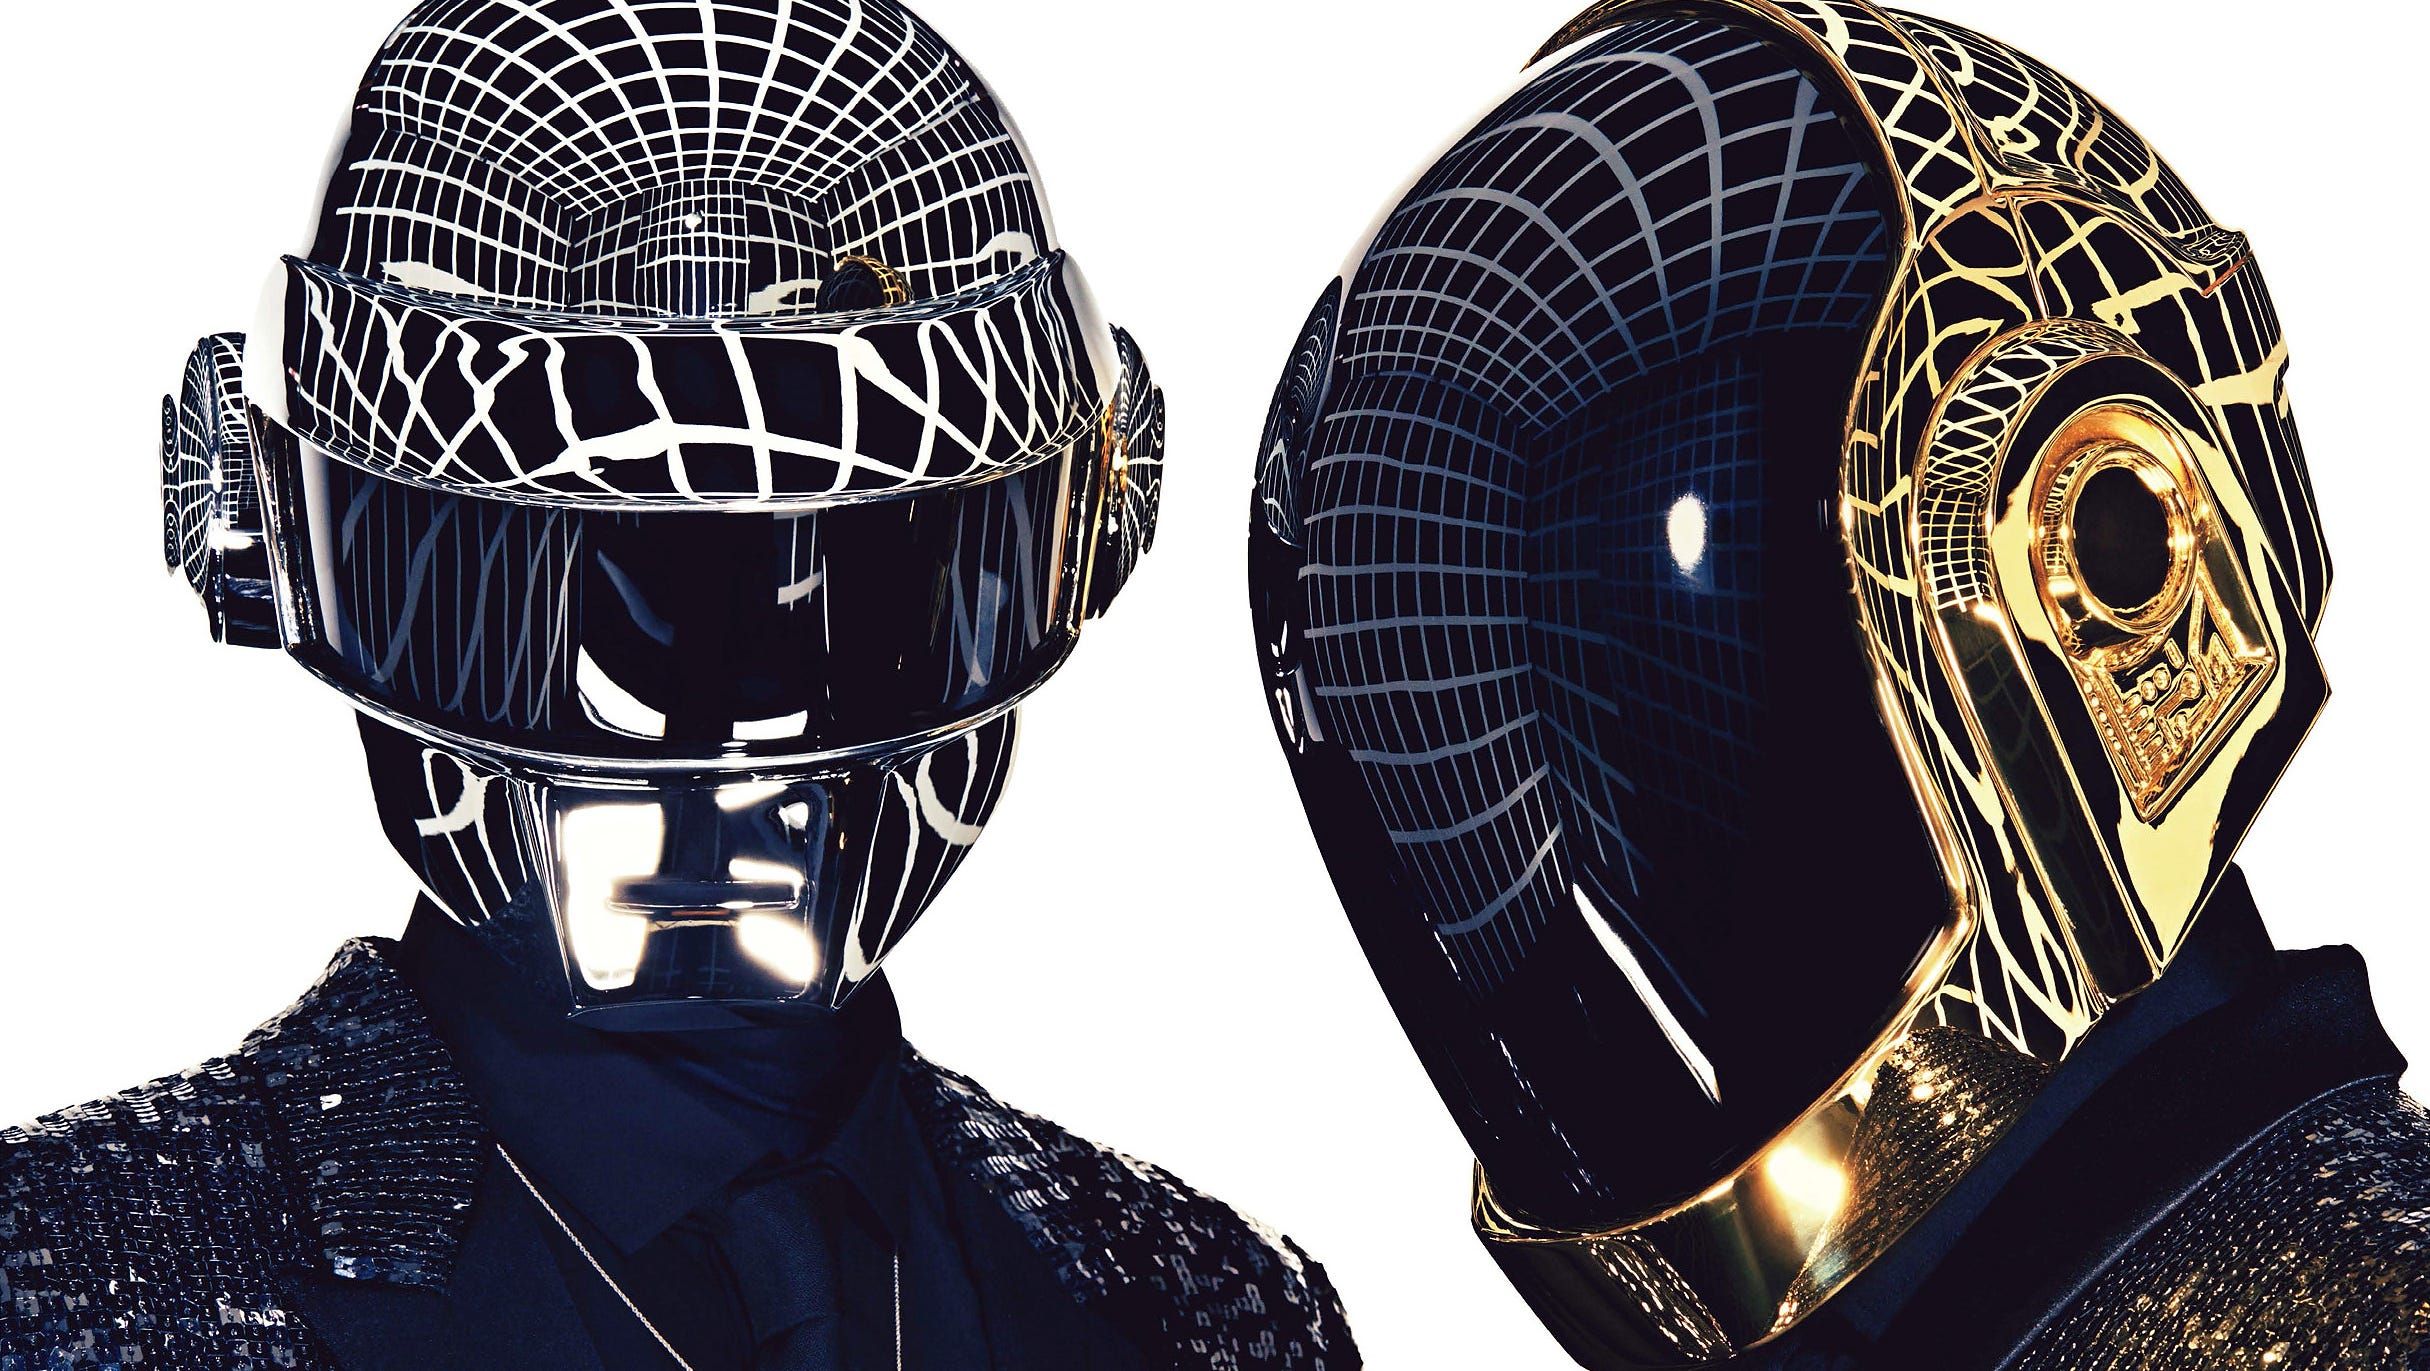 Daft punk's return confirmed in late 2021 and early 2022